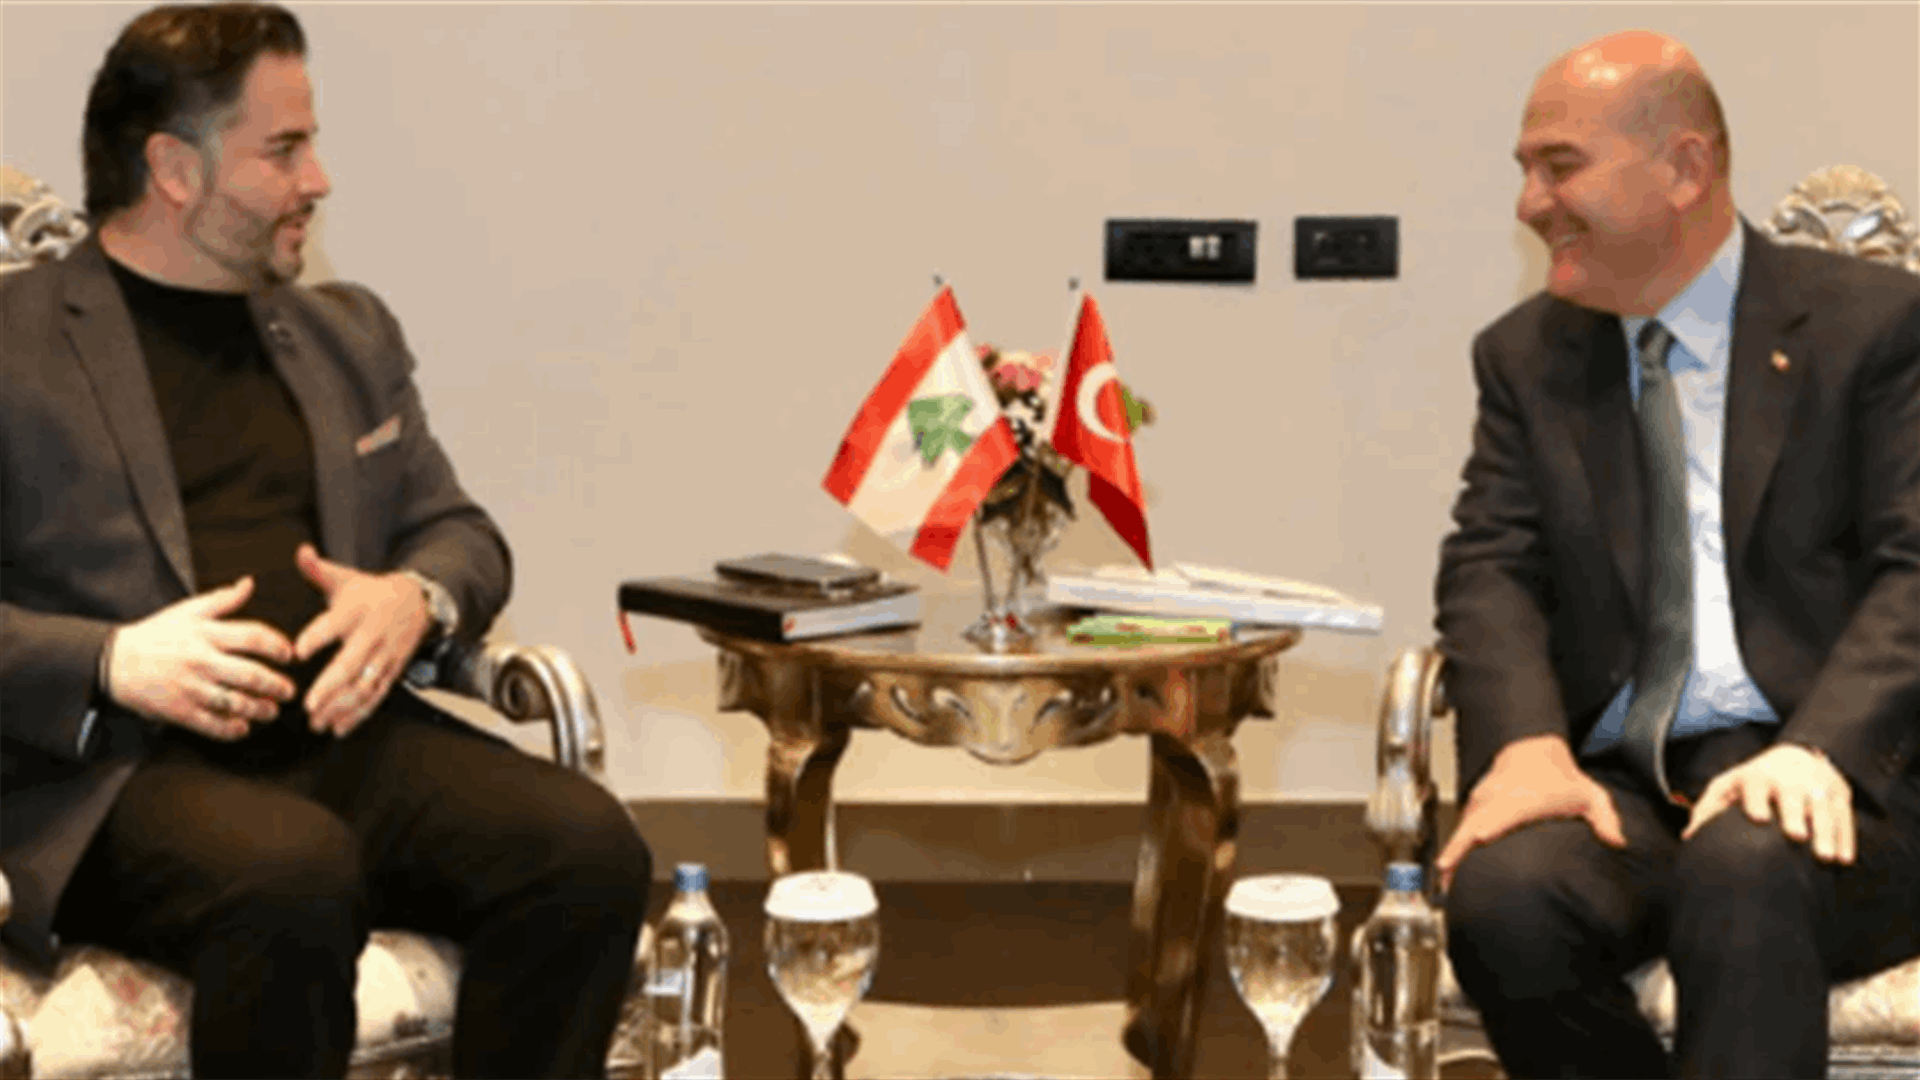 Economy Minister Salam meets with Turkish Interior Minister in Antalya